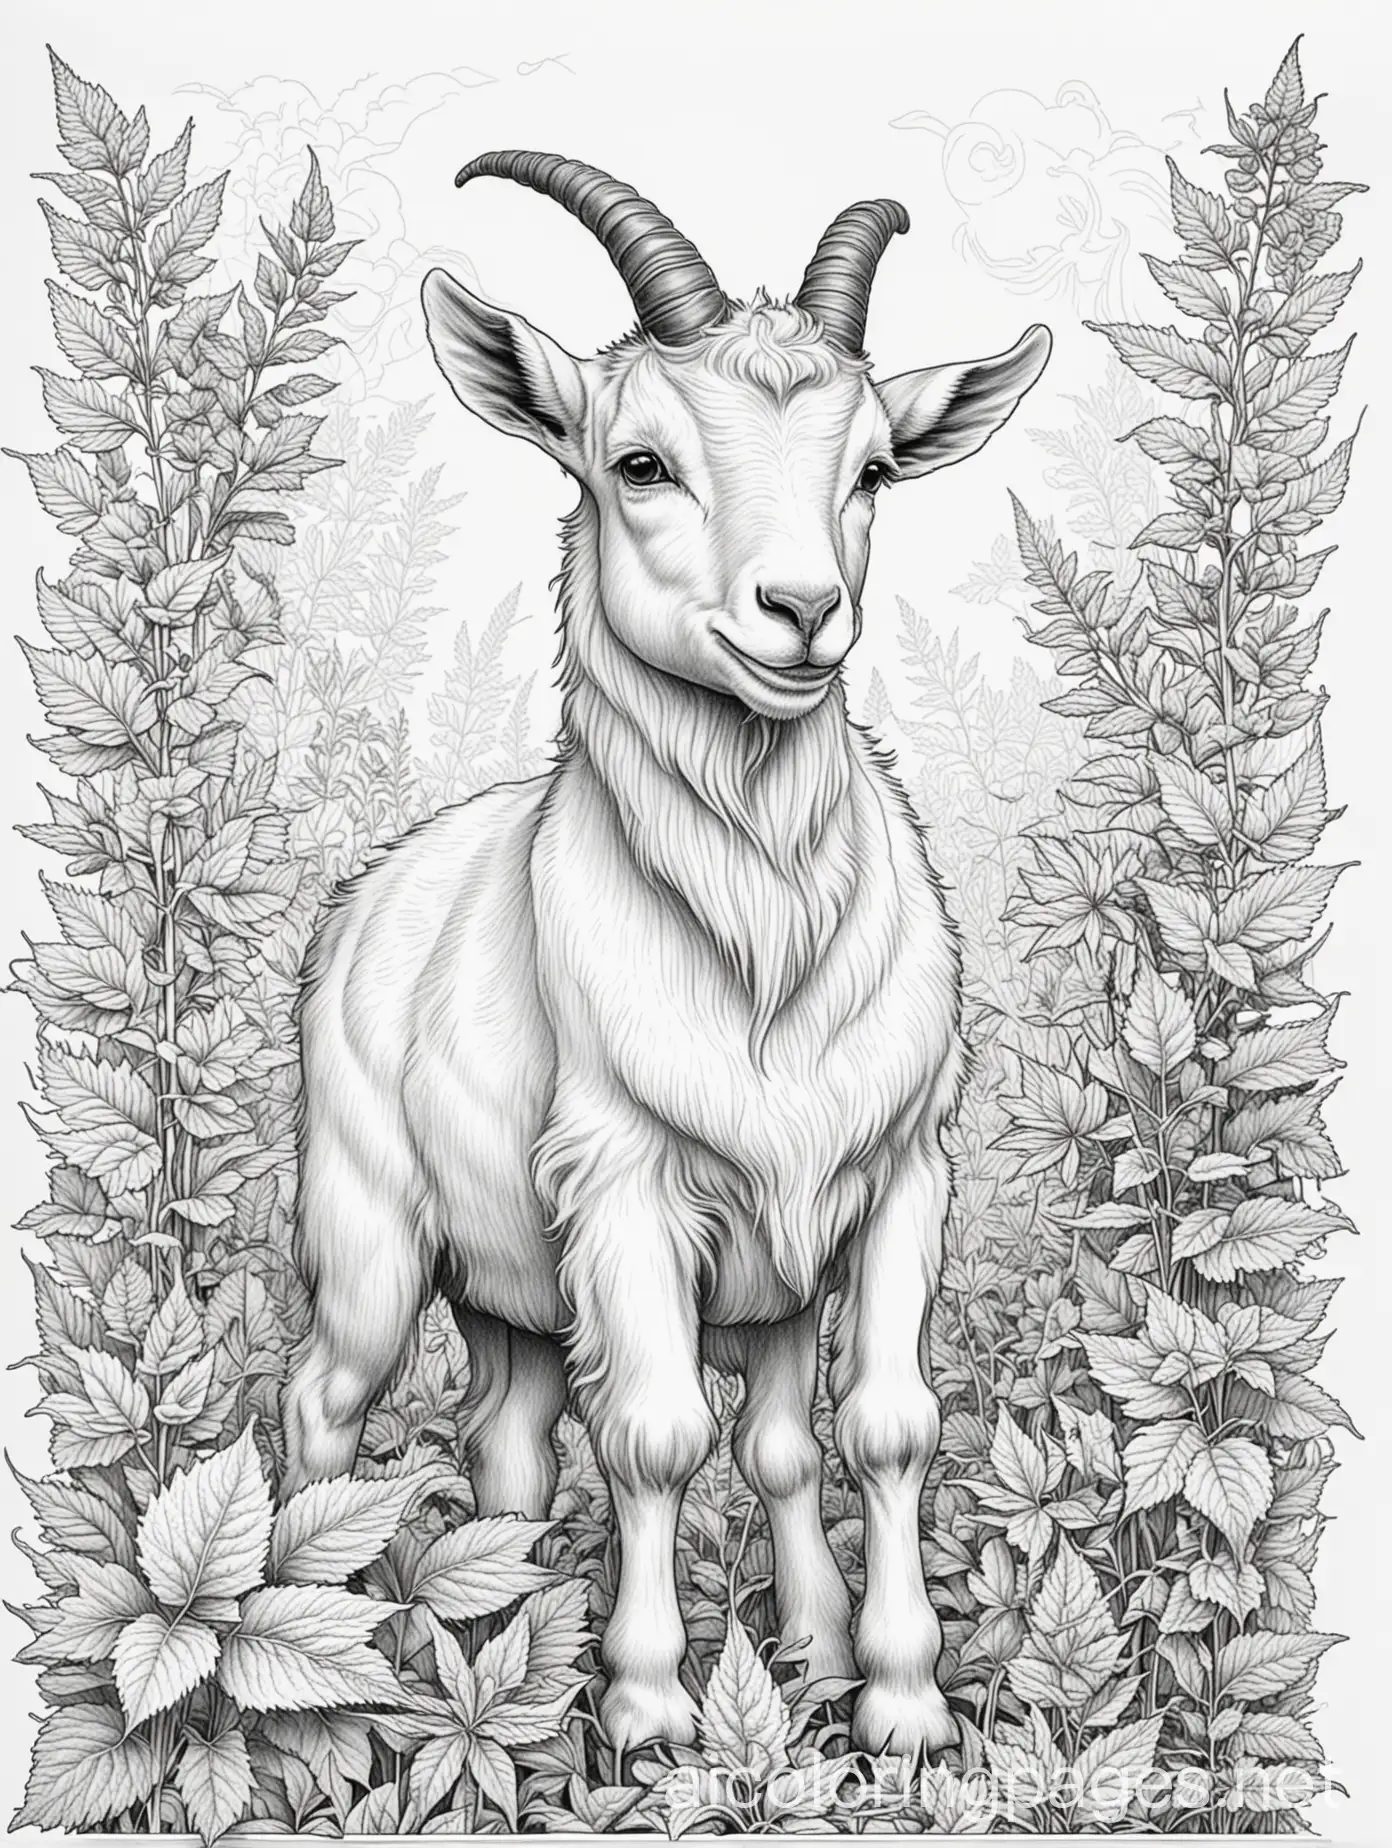 Fantasy-Goats-Coloring-Page-Whimsical-Line-Art-on-White-Background